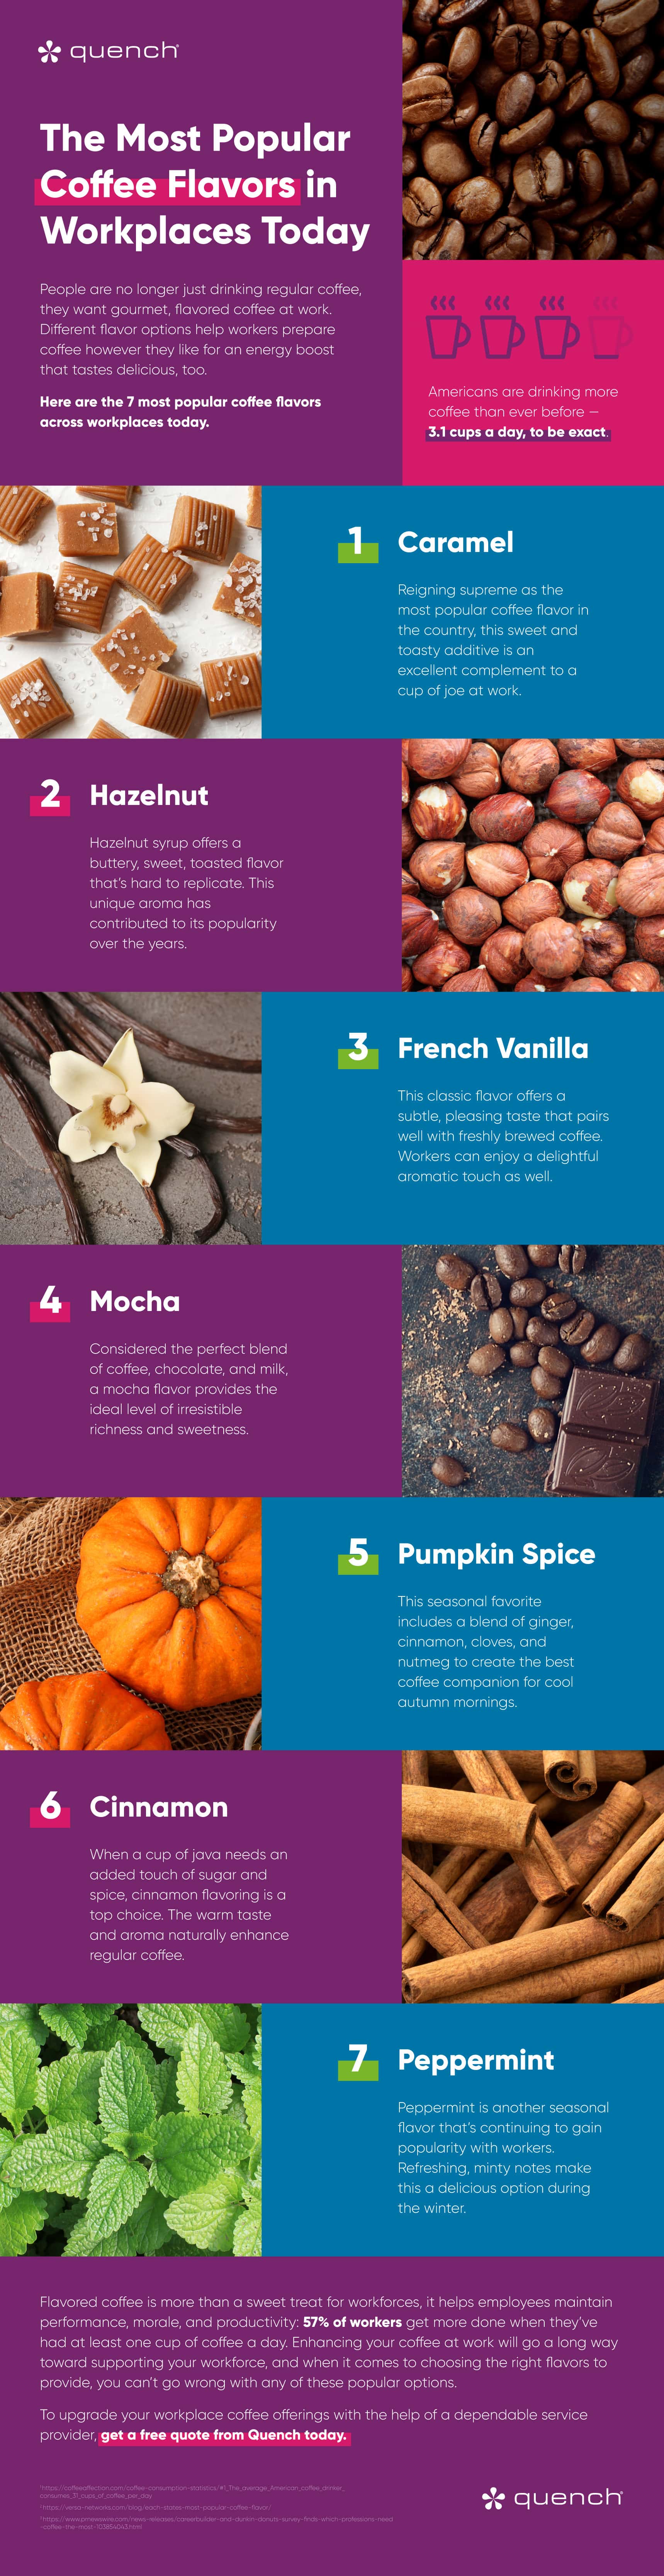 Colorful infographic on the most popular coffee flavors